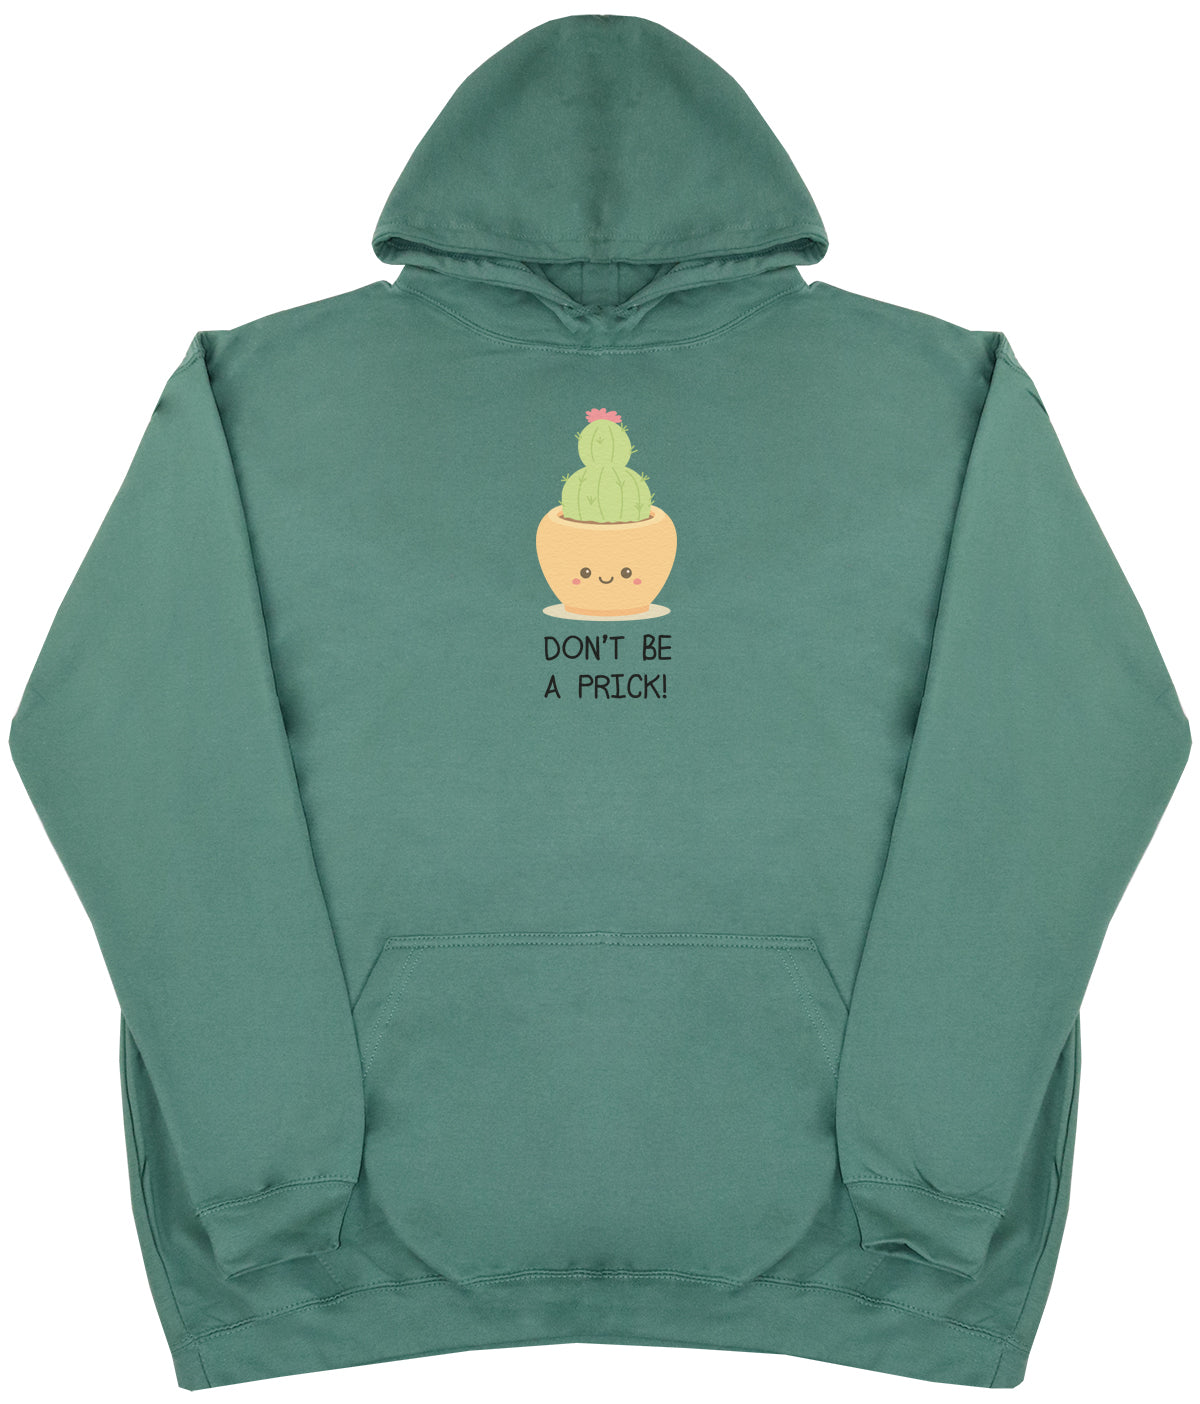 Don't Be A Prick - Huge Oversized Comfy Original Hoody